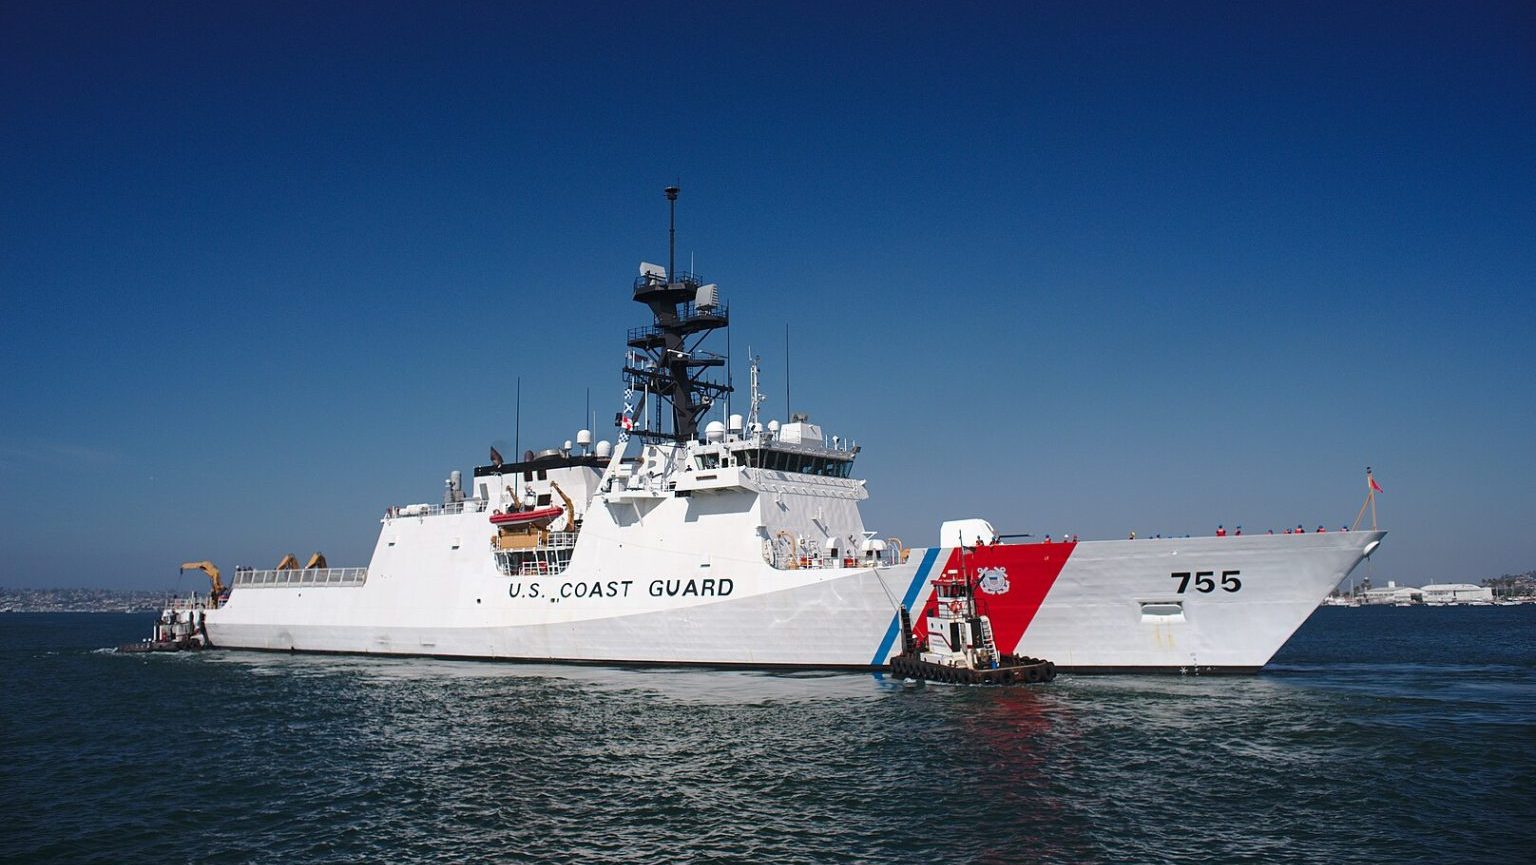 A u.s. coast guard cutter sails on calm blue waters against a clear sky, flying the coast guard flag on its stern.